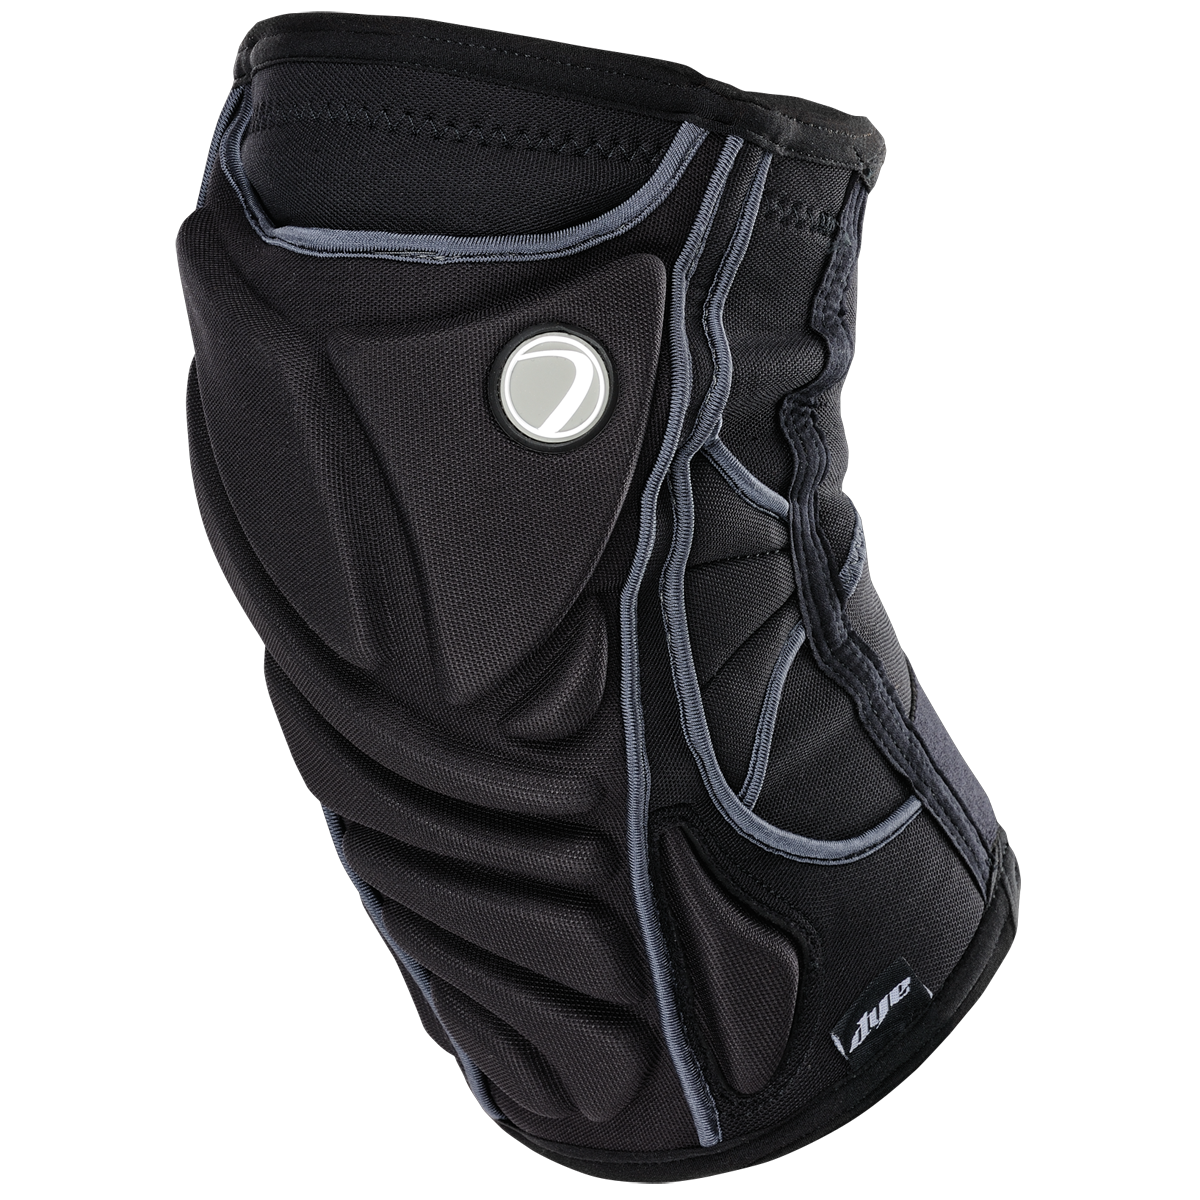 Dye Performance Paintball Knee Pads - Large